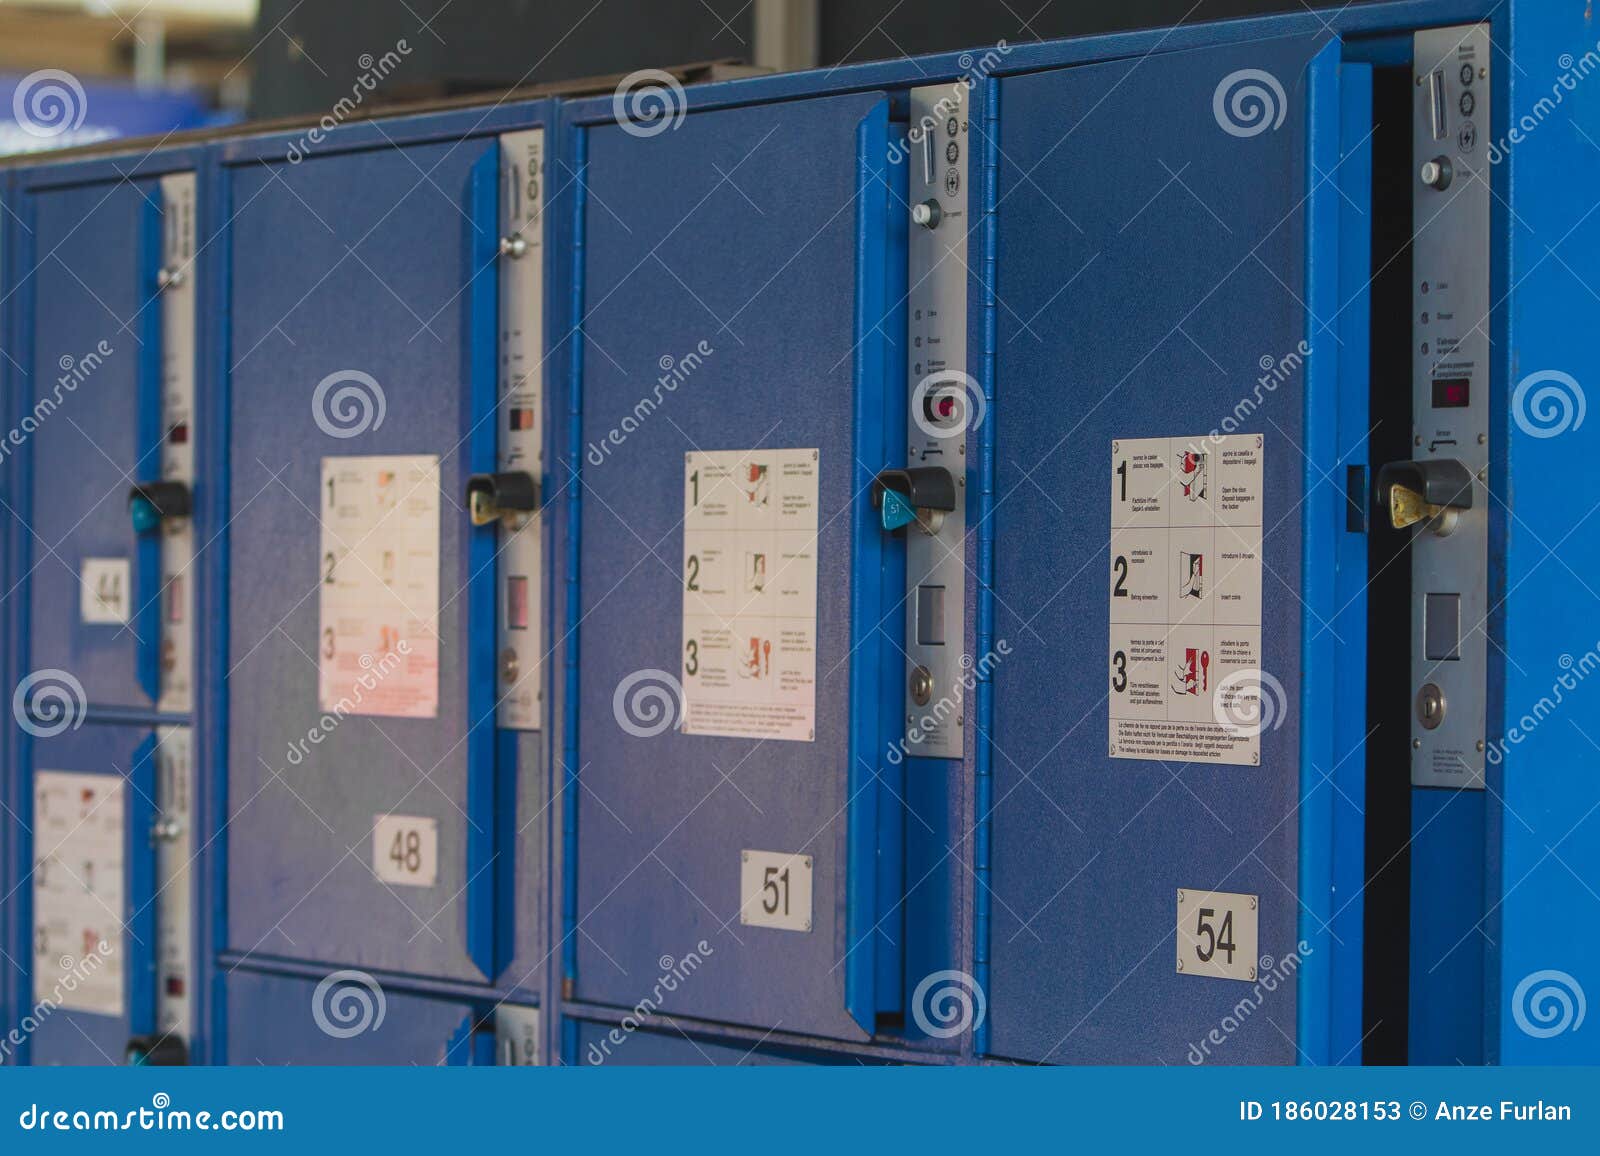 Eigen Relatief beha Train Station Lockers in Blue Color at an Unknown Station in Switzerland  Stock Image - Image of college, travel: 186028153